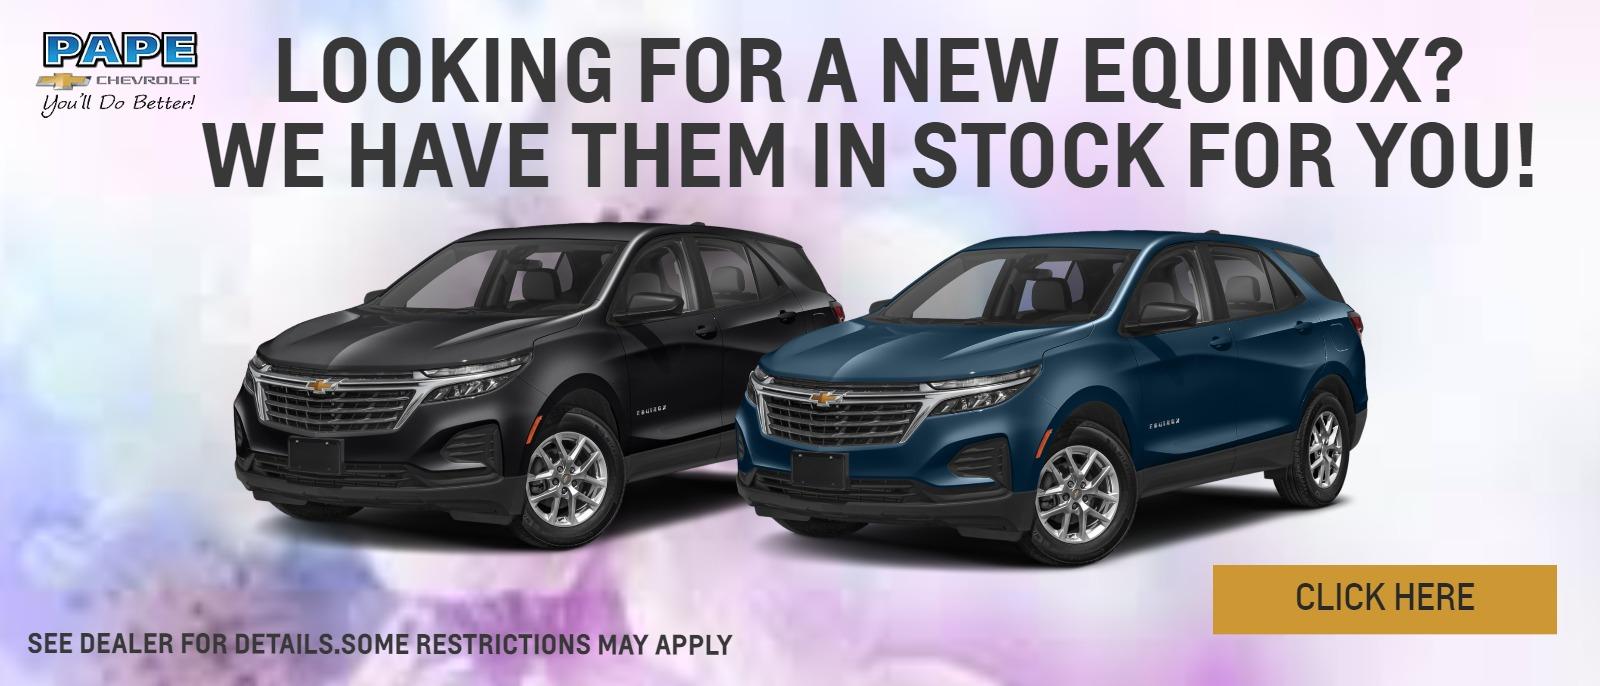 Looking for a new Equinox? We Have them in Stock for You!
See Dealer for Details. Some Restrictions May Apply.